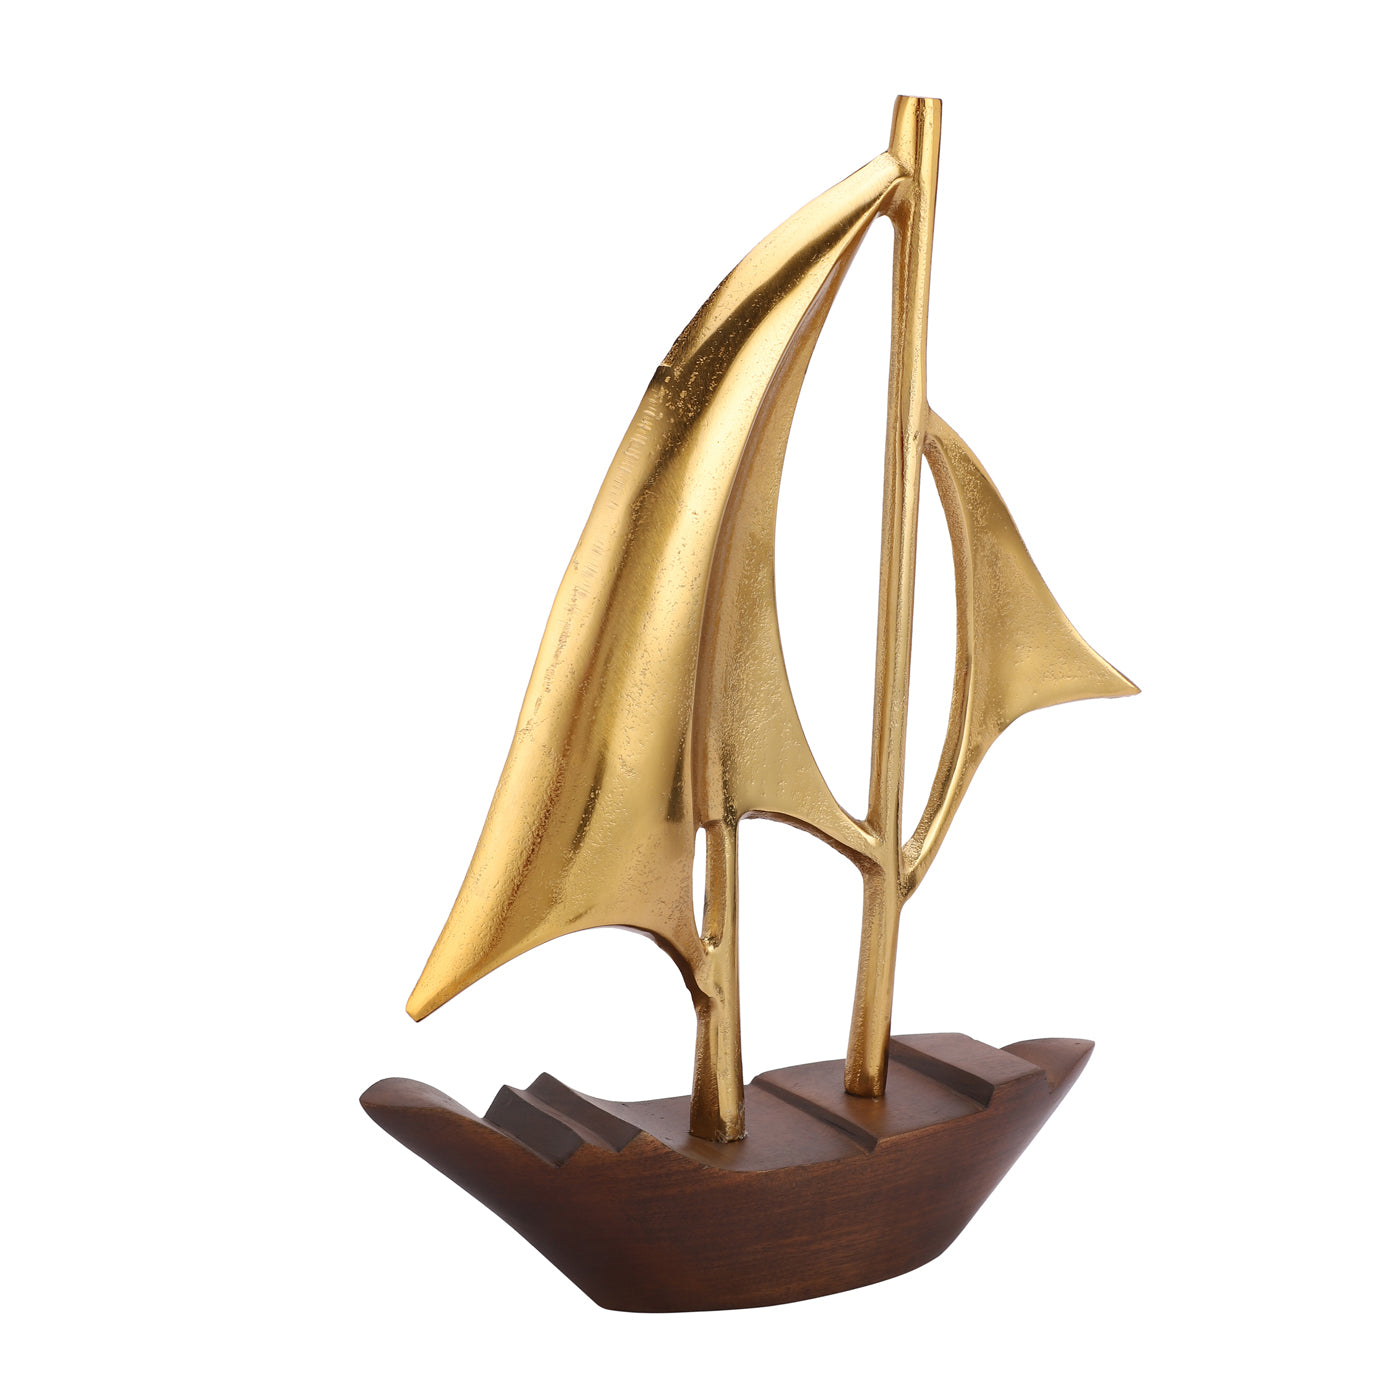 Brings Gold Boat Showpiece for Living Room, Home Decor, Table Decor Office Desk Shelf and Birthday Gift